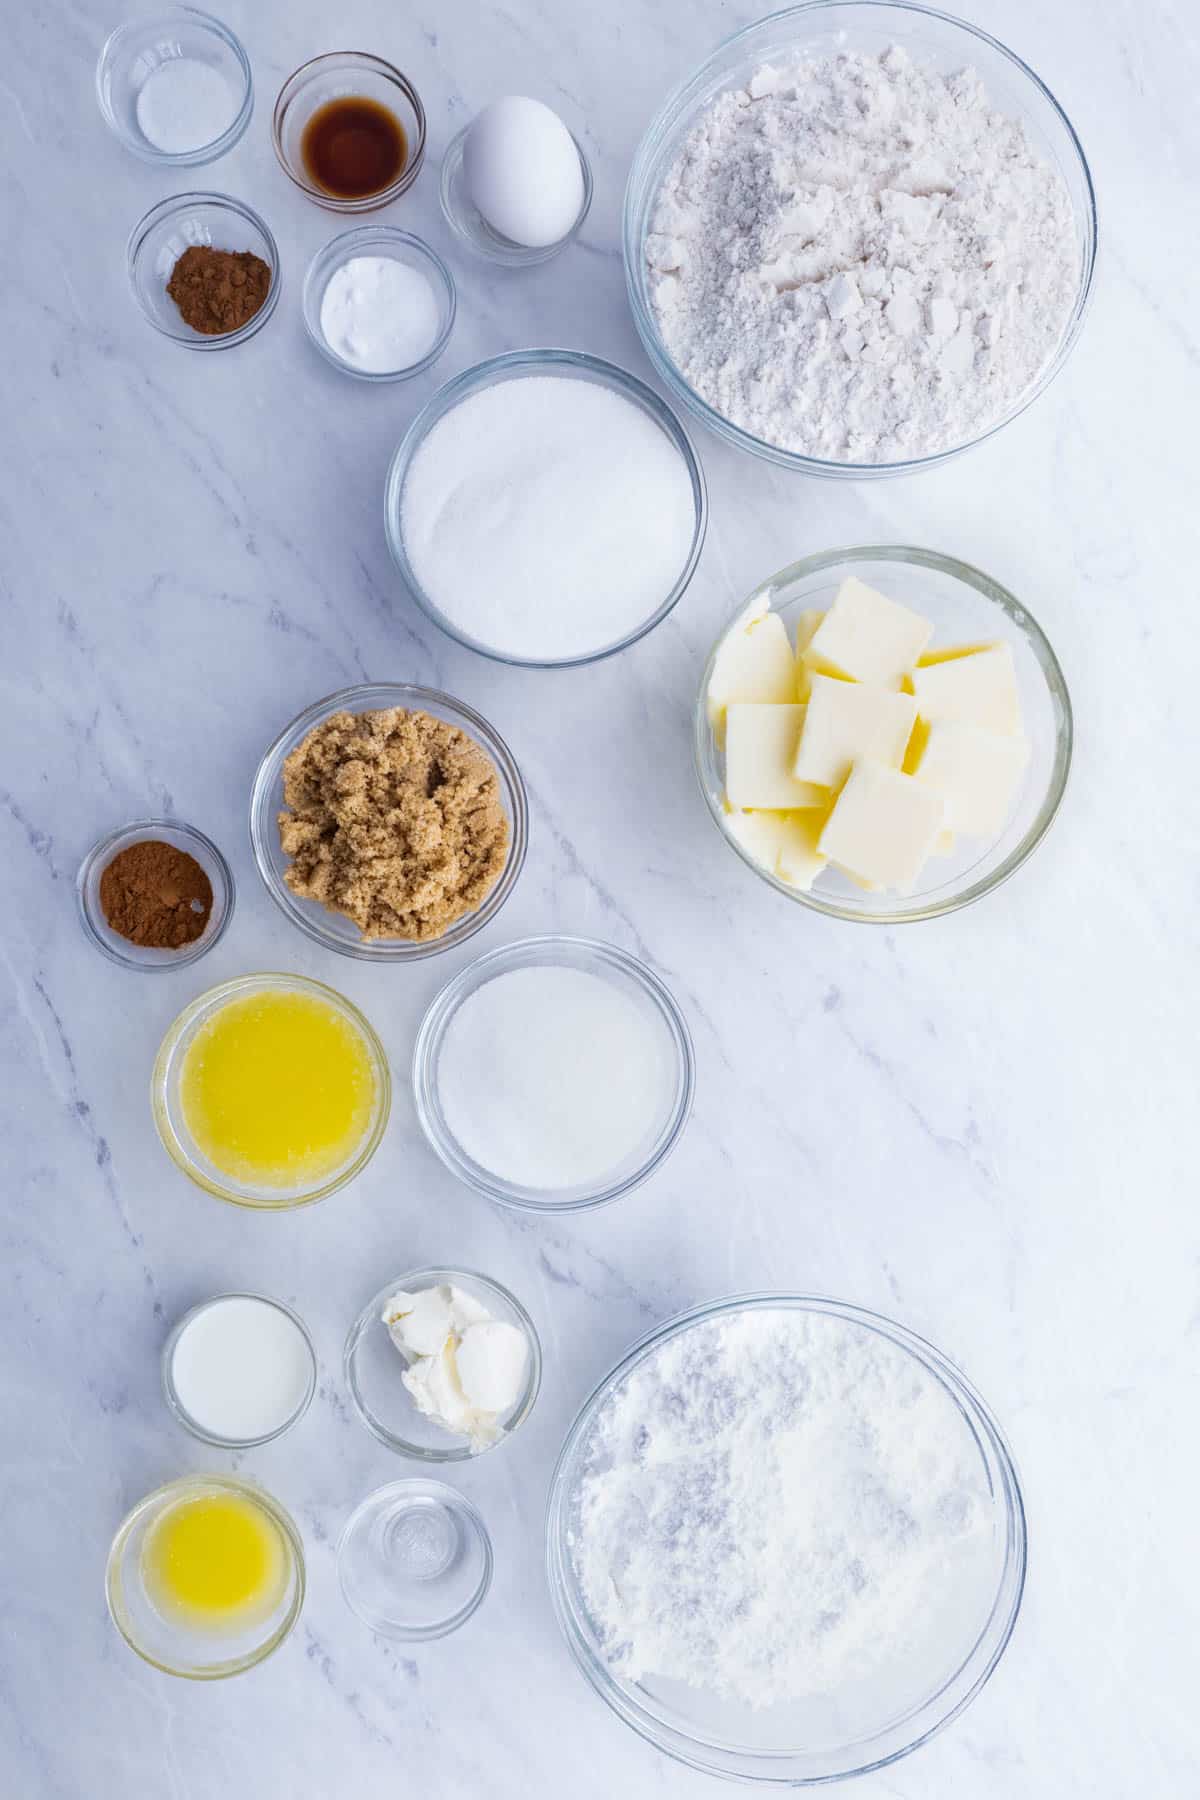 Flour, sugar, butter, cinnamon, sugar, and spices are the main ingredients for this recipe.